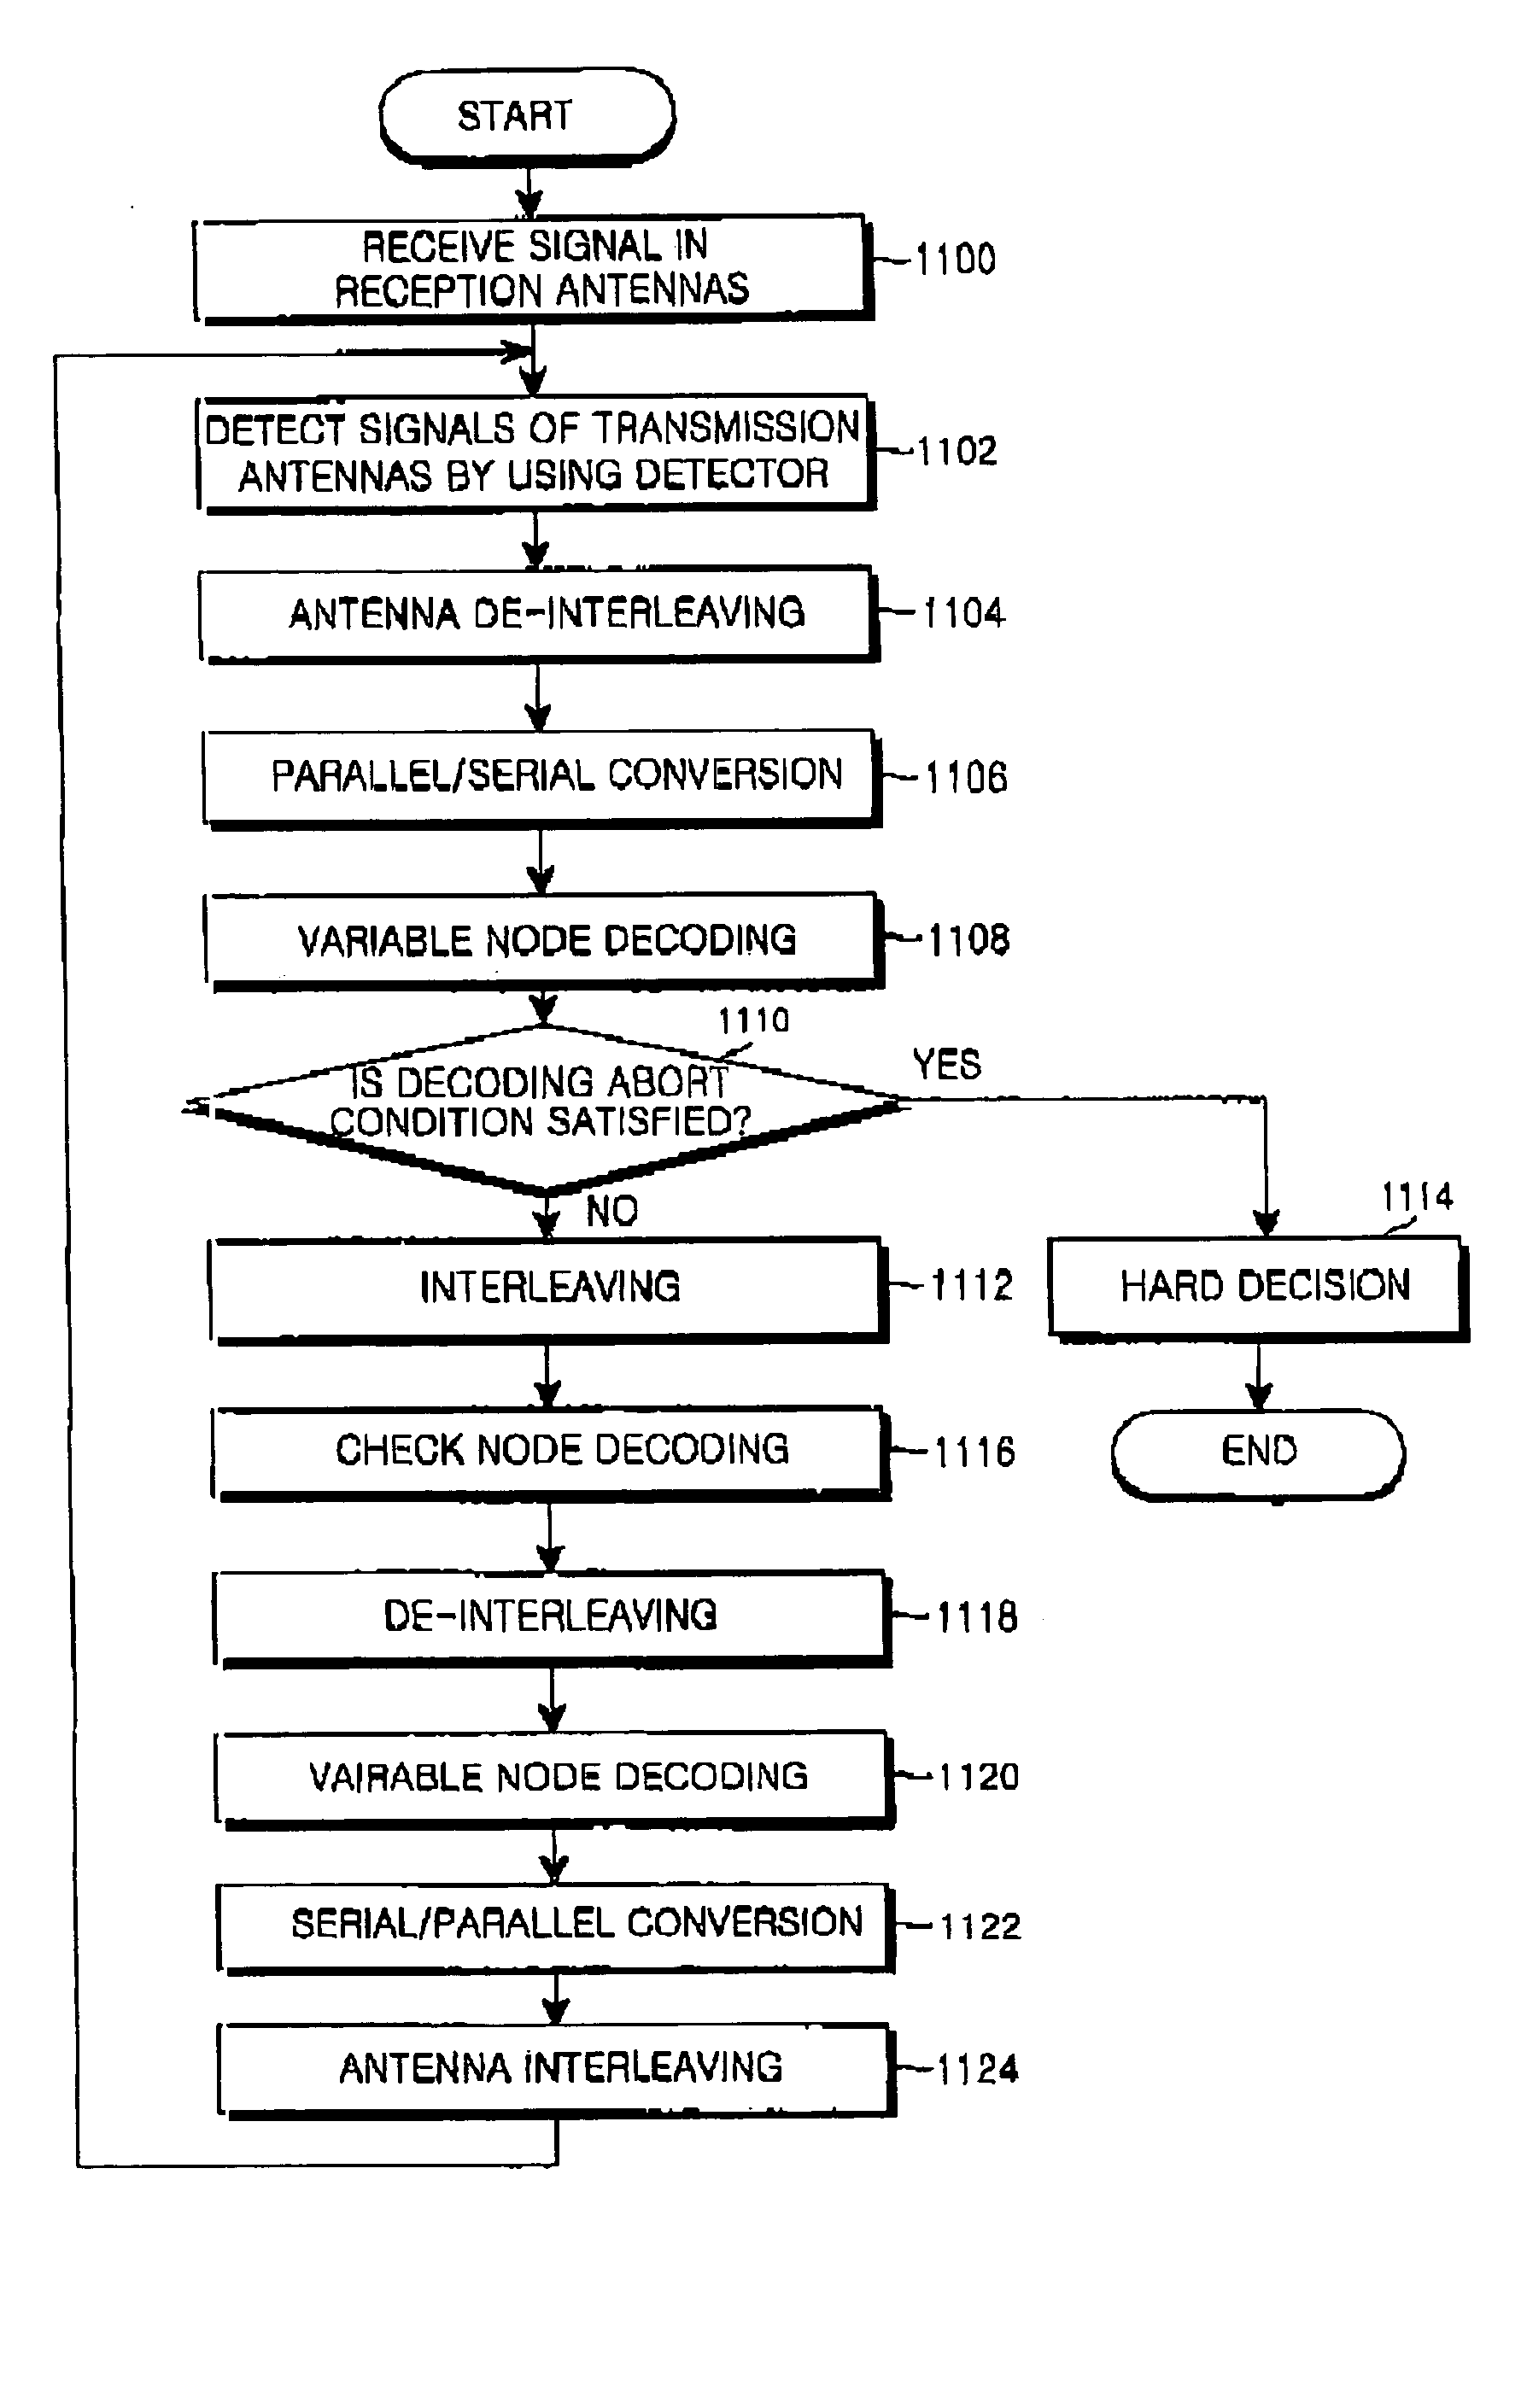 Method and apparatus for space-time coding using lifting low density parity check codes in a wireless communication system